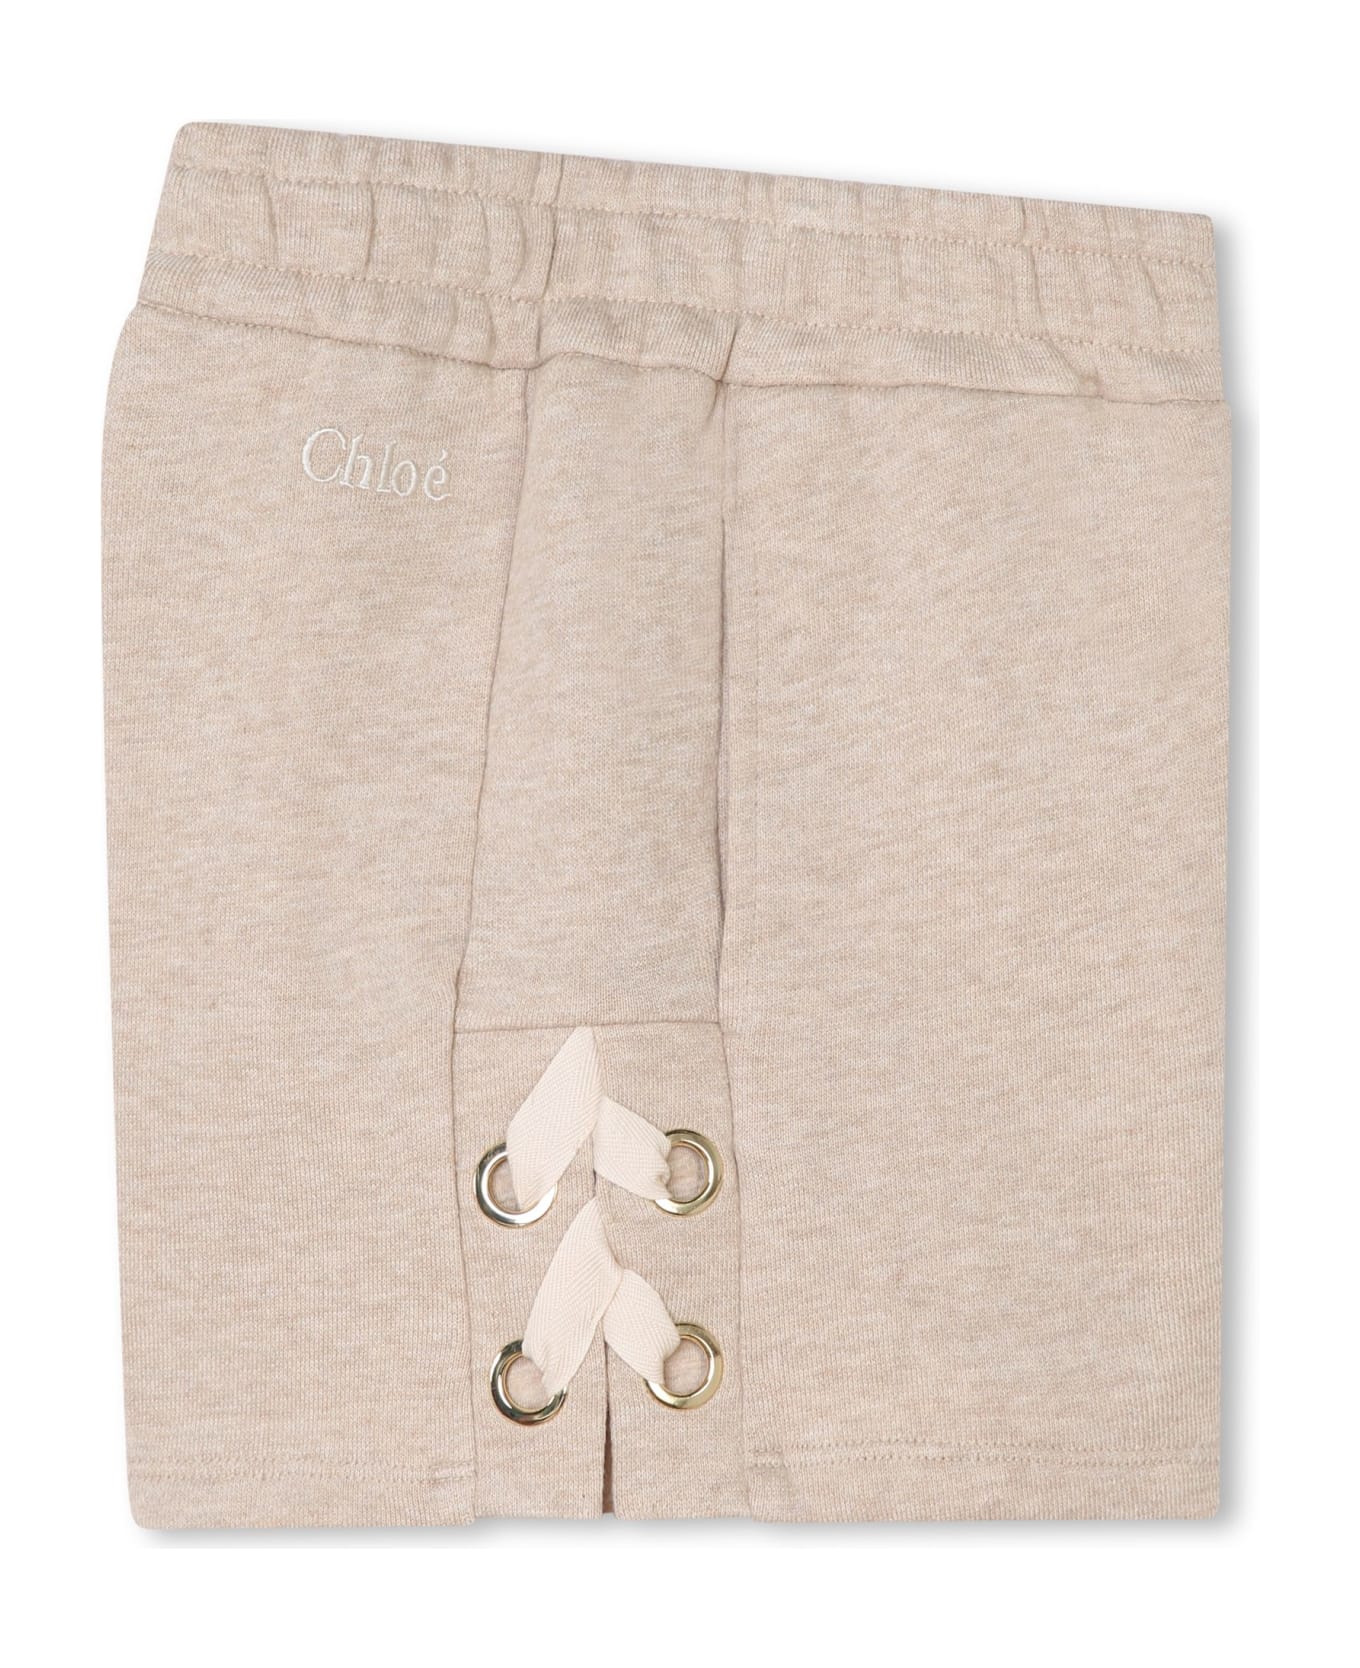 Chloé Shorts With Embroidery - Beige Antico